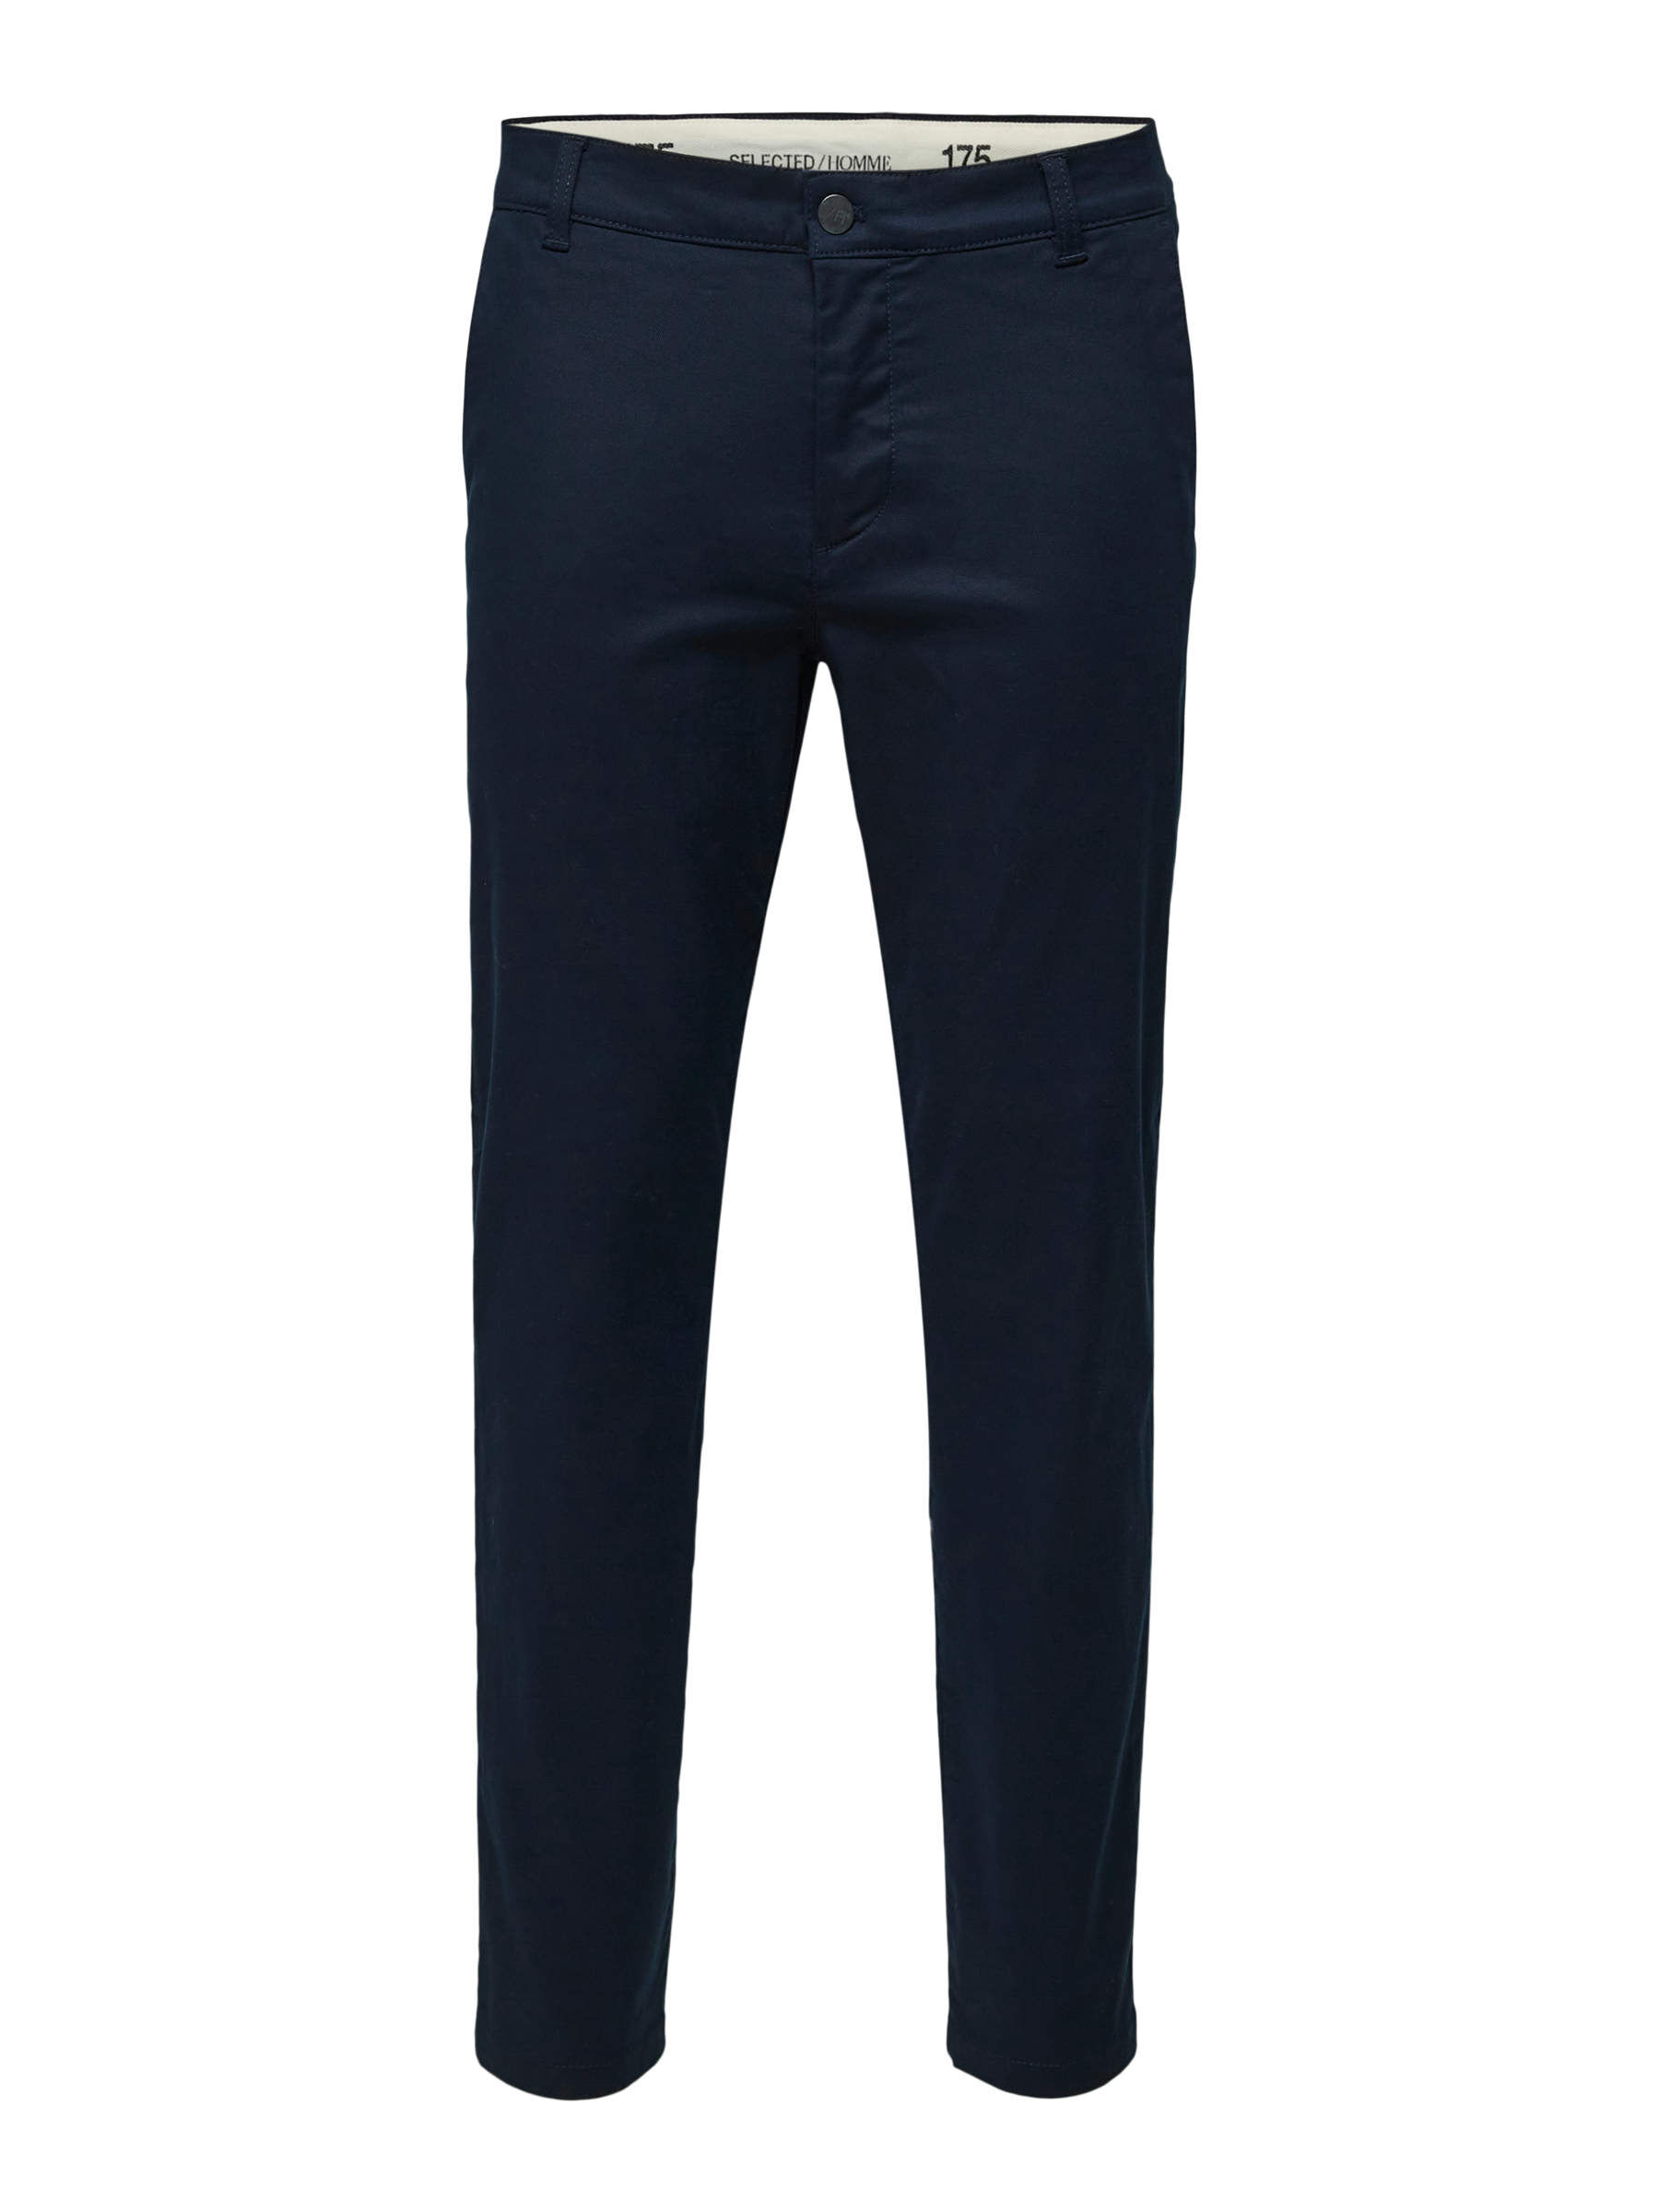 Buy Green Slim Fit Cotton Pants for Men Online at SELECTED HOMME137916703